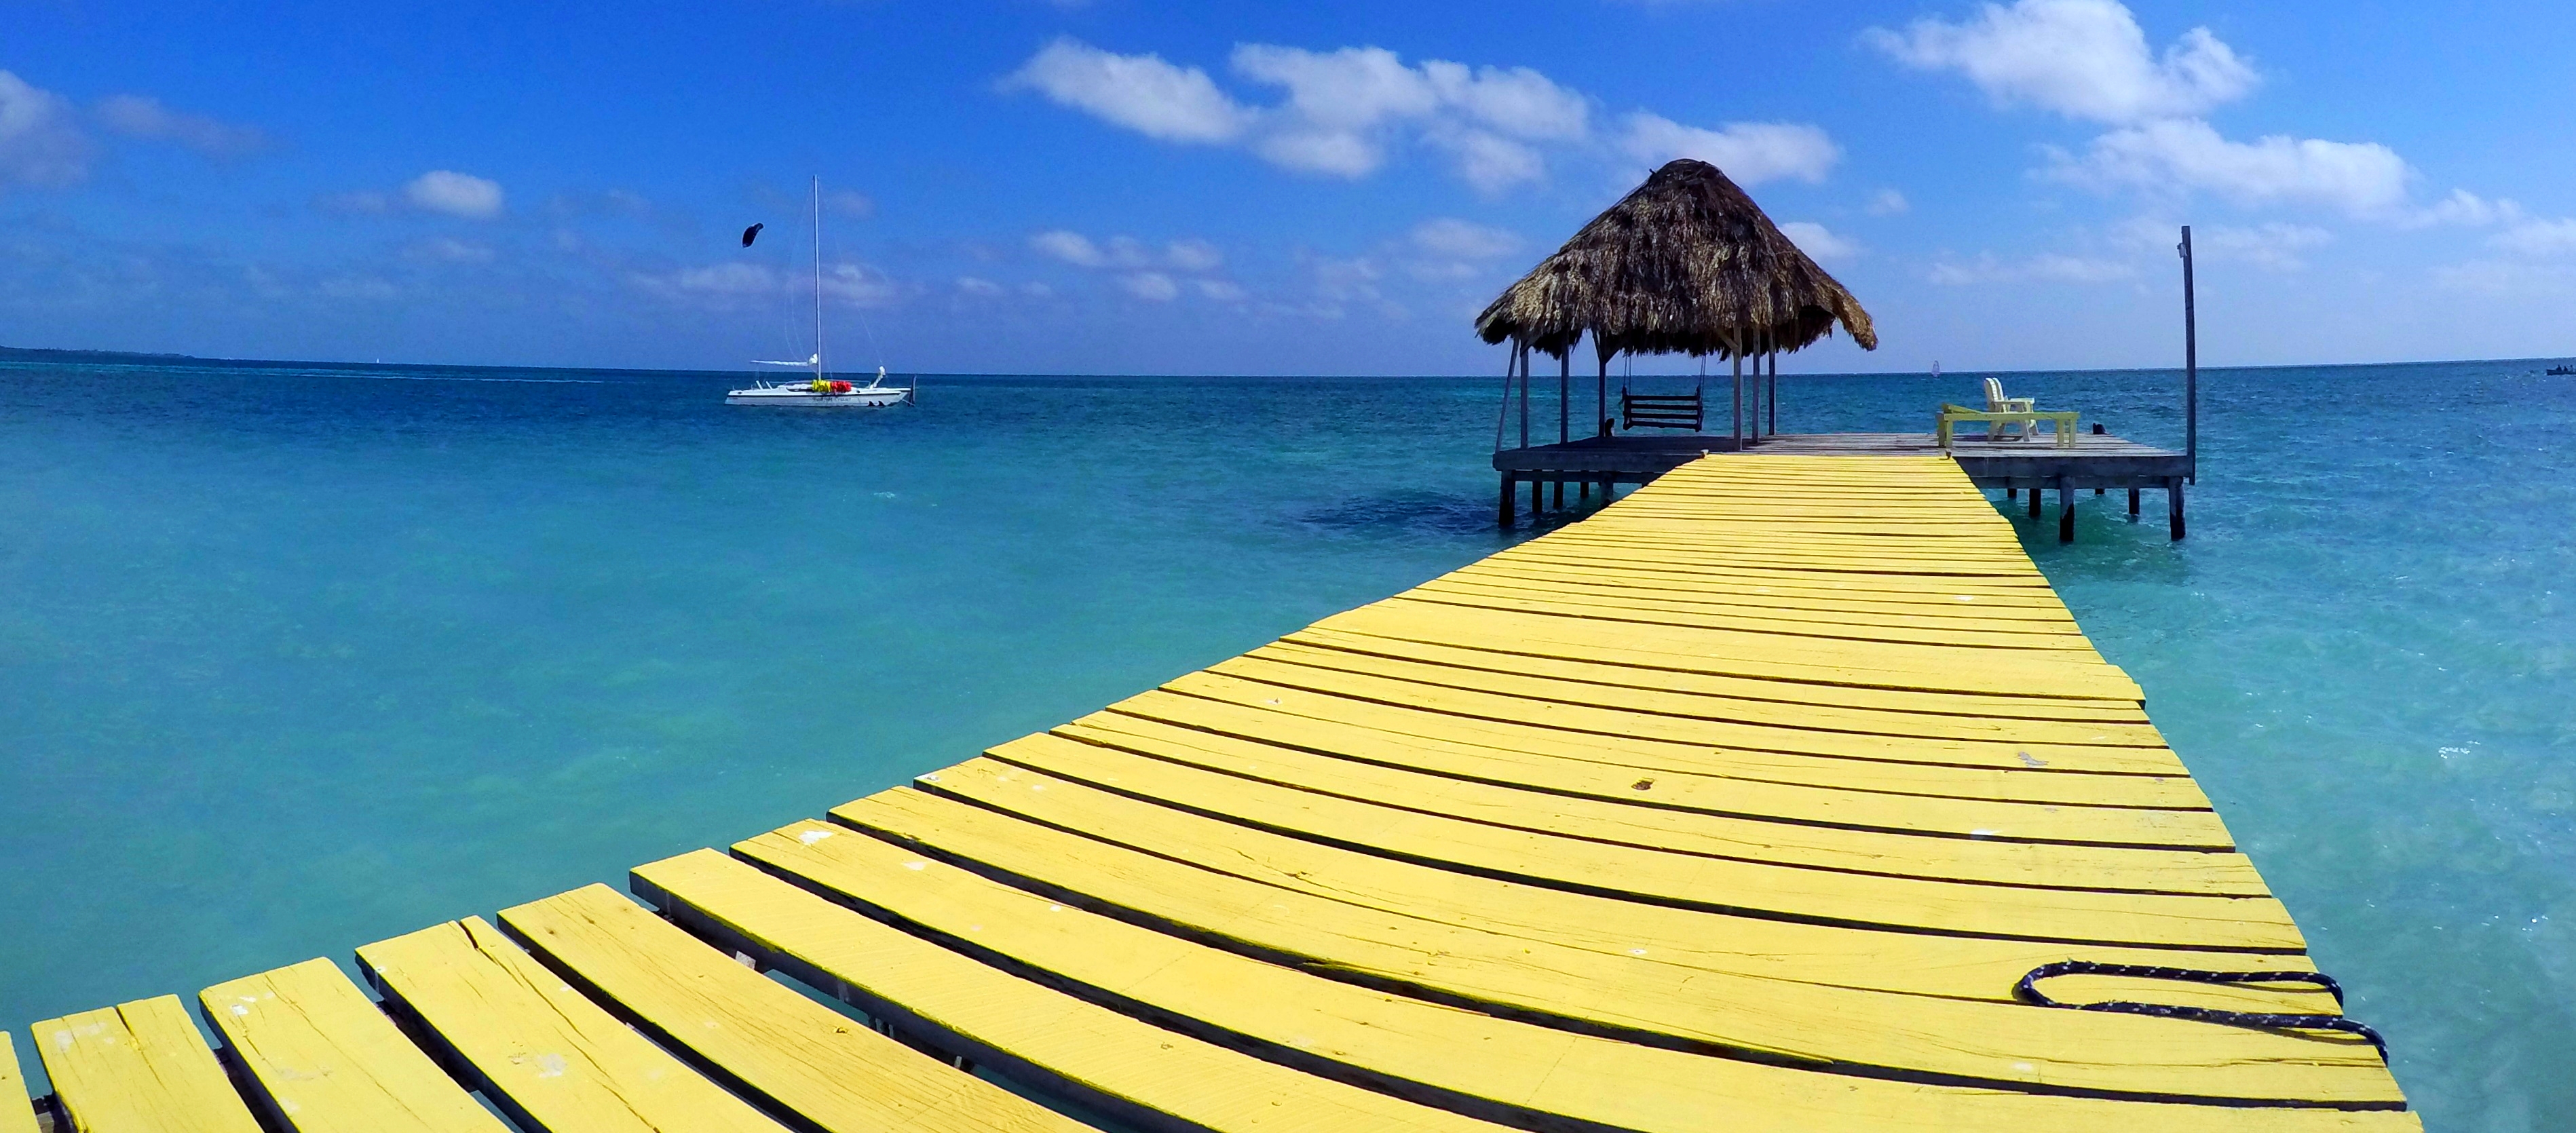 Belize – The Caribbean on a Budget